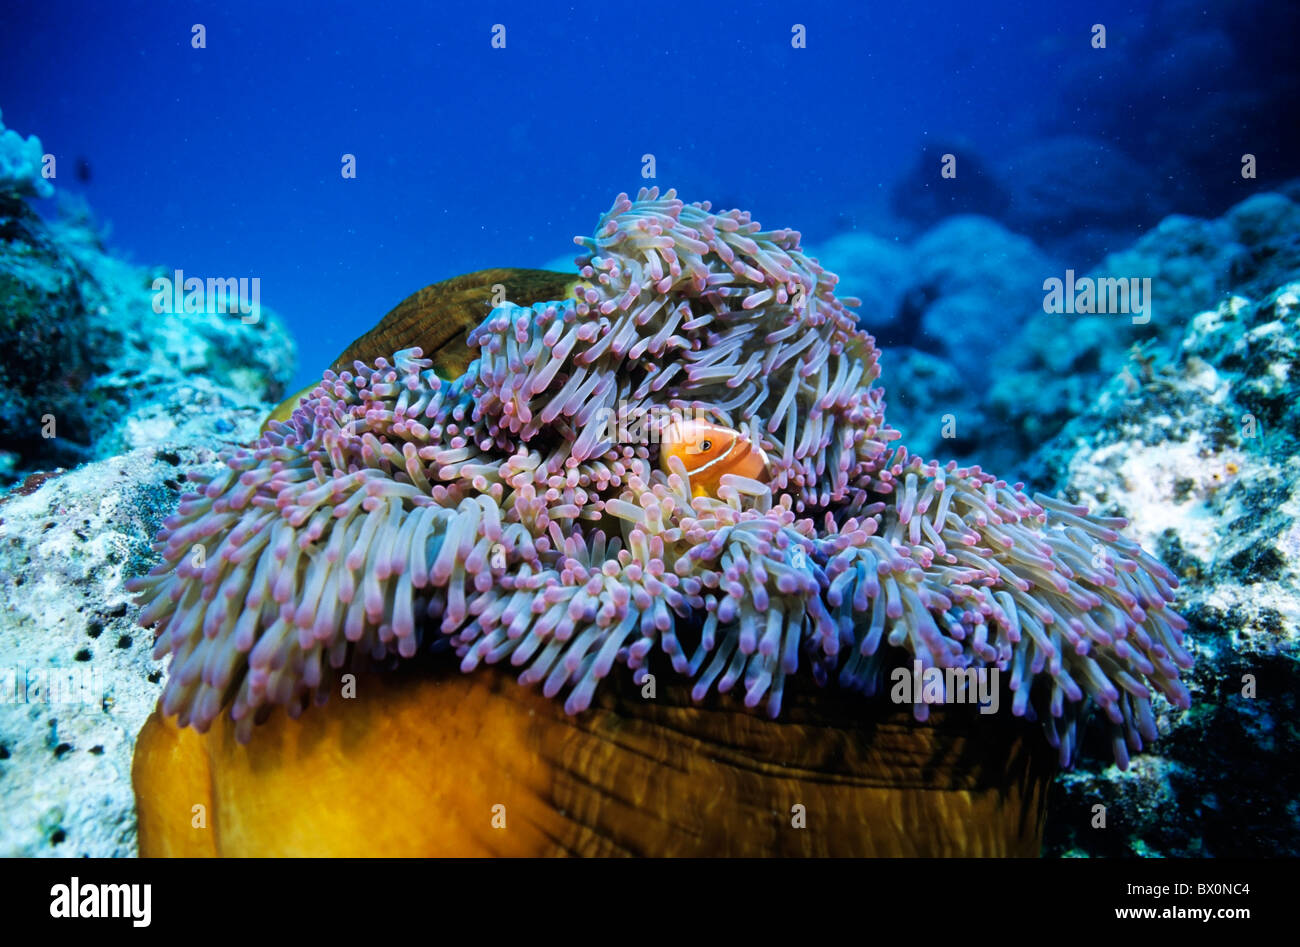 Clownfish hiding and peeking out of a magnificent sea anemone, Noumea Lagoon, New Caledonia. Stock Photo